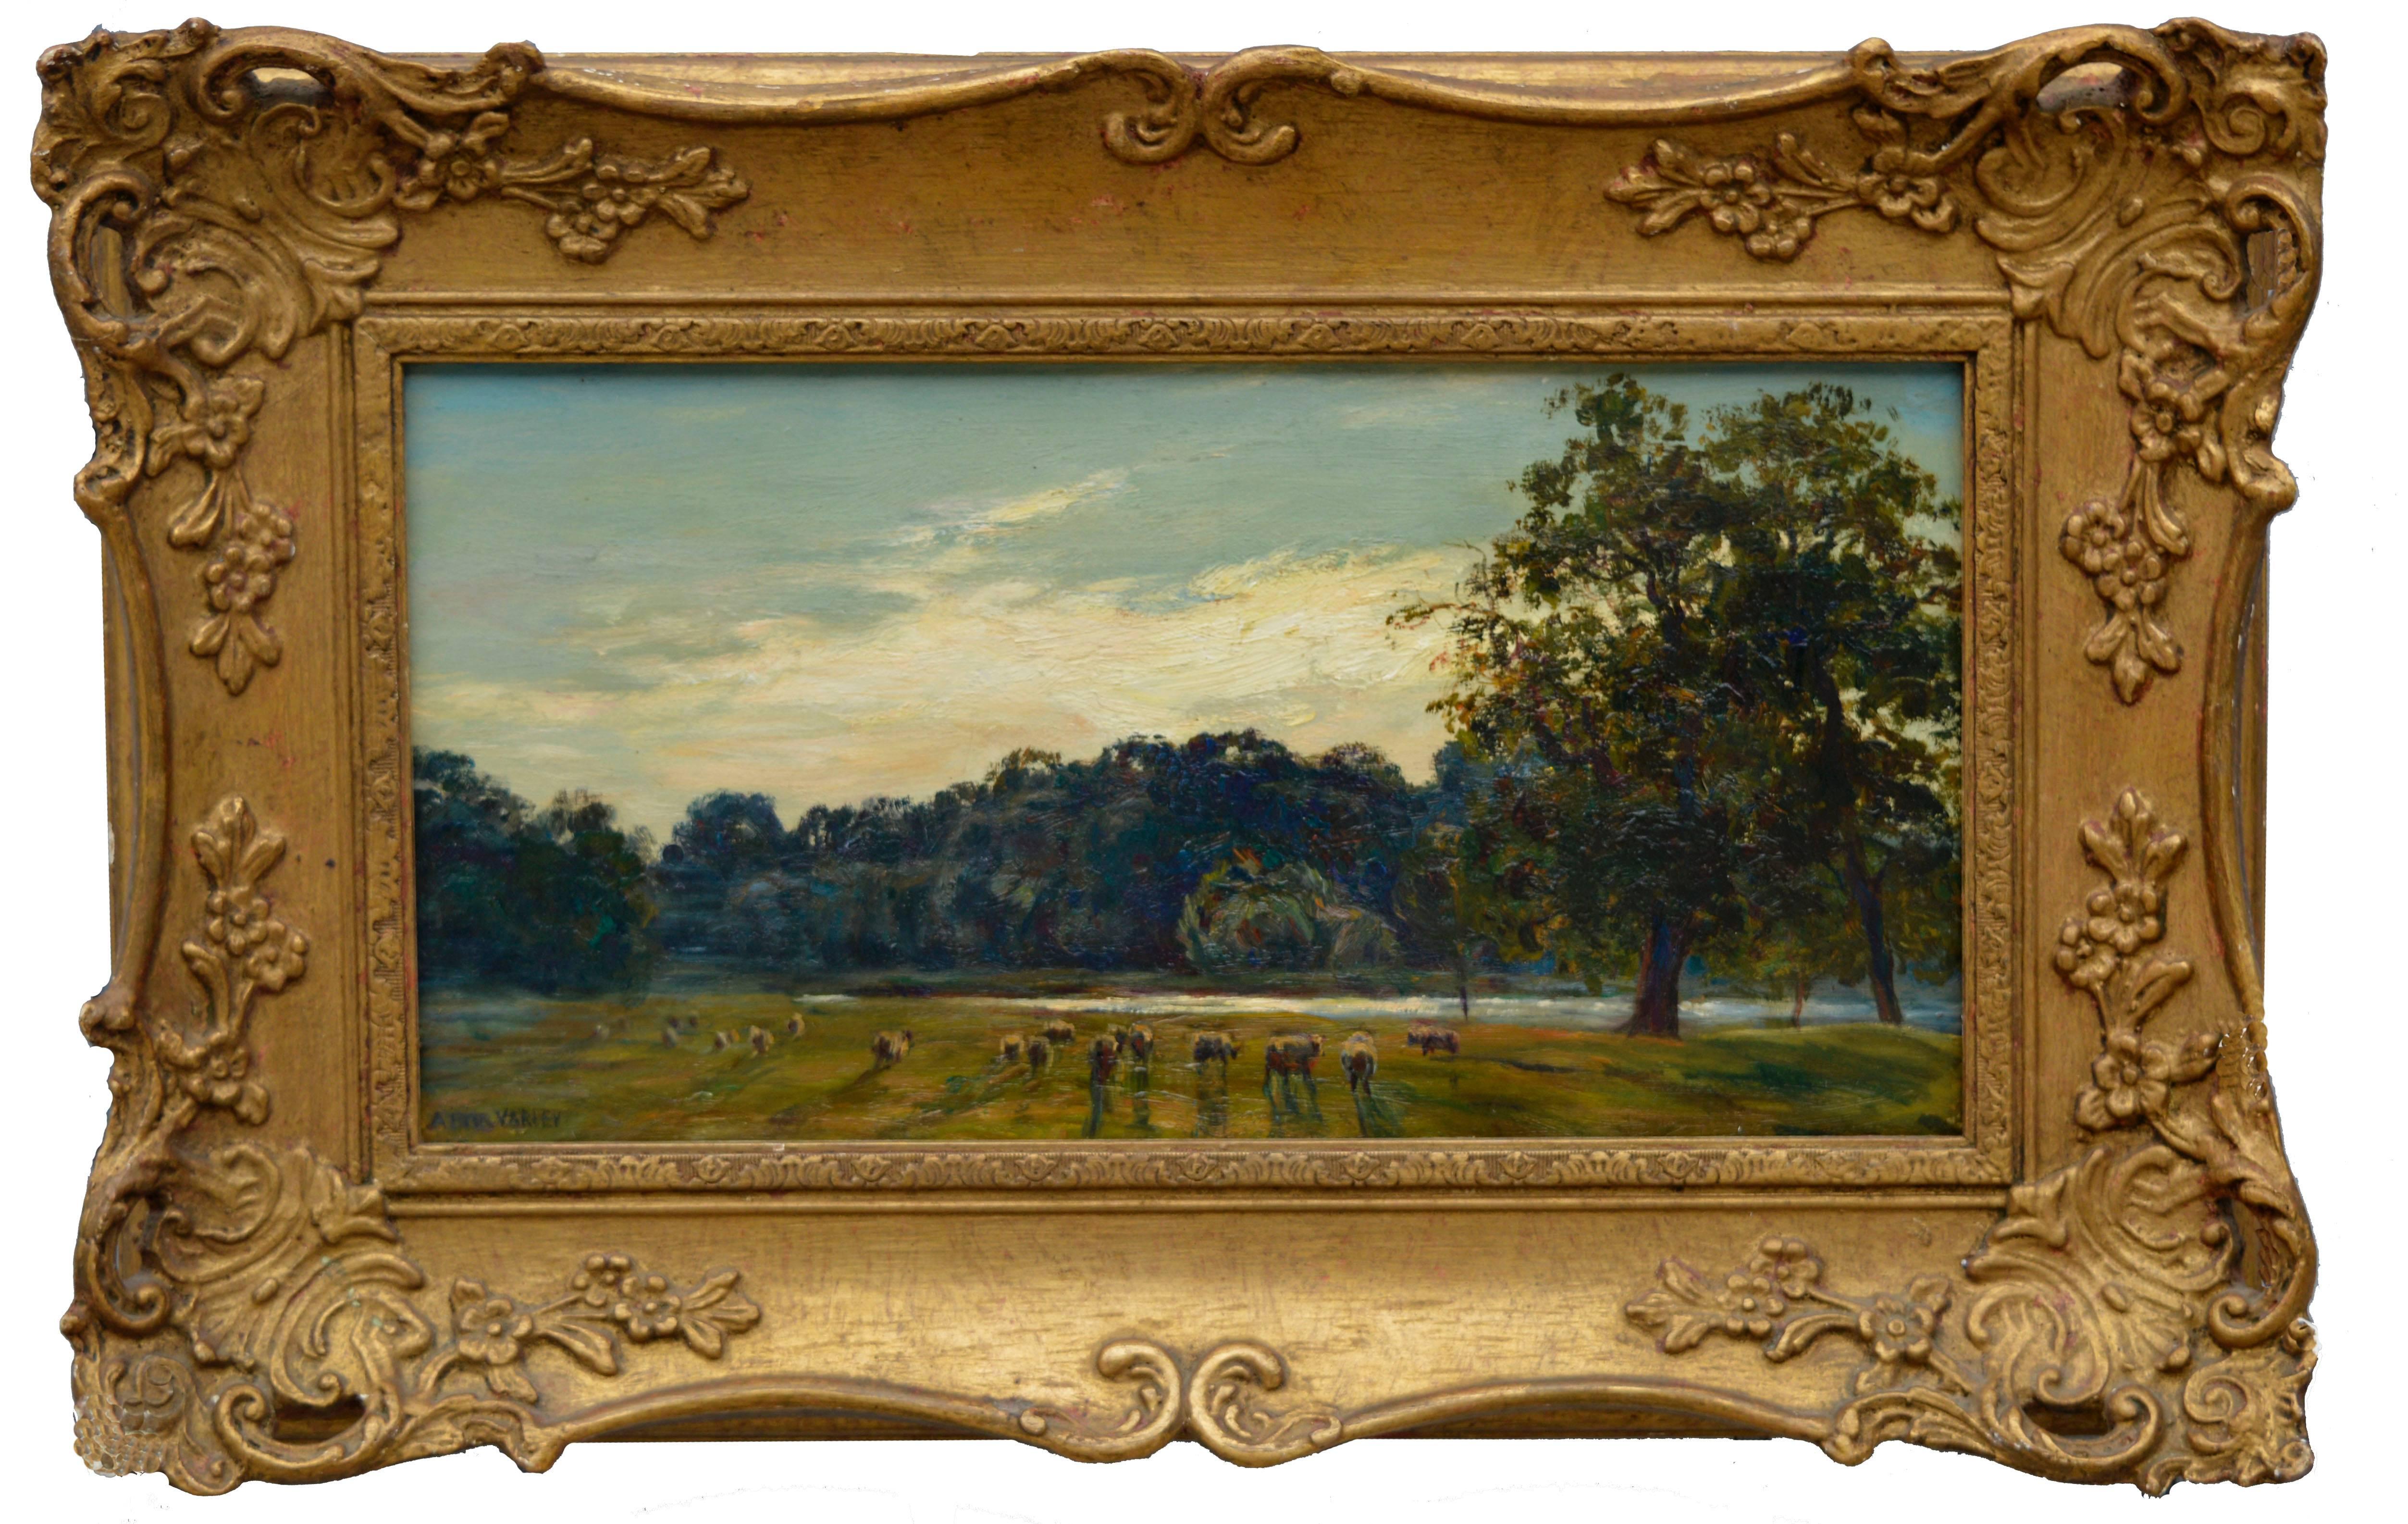 Unknown Landscape Painting - 19th Century Pastoral In Manner of John Varley